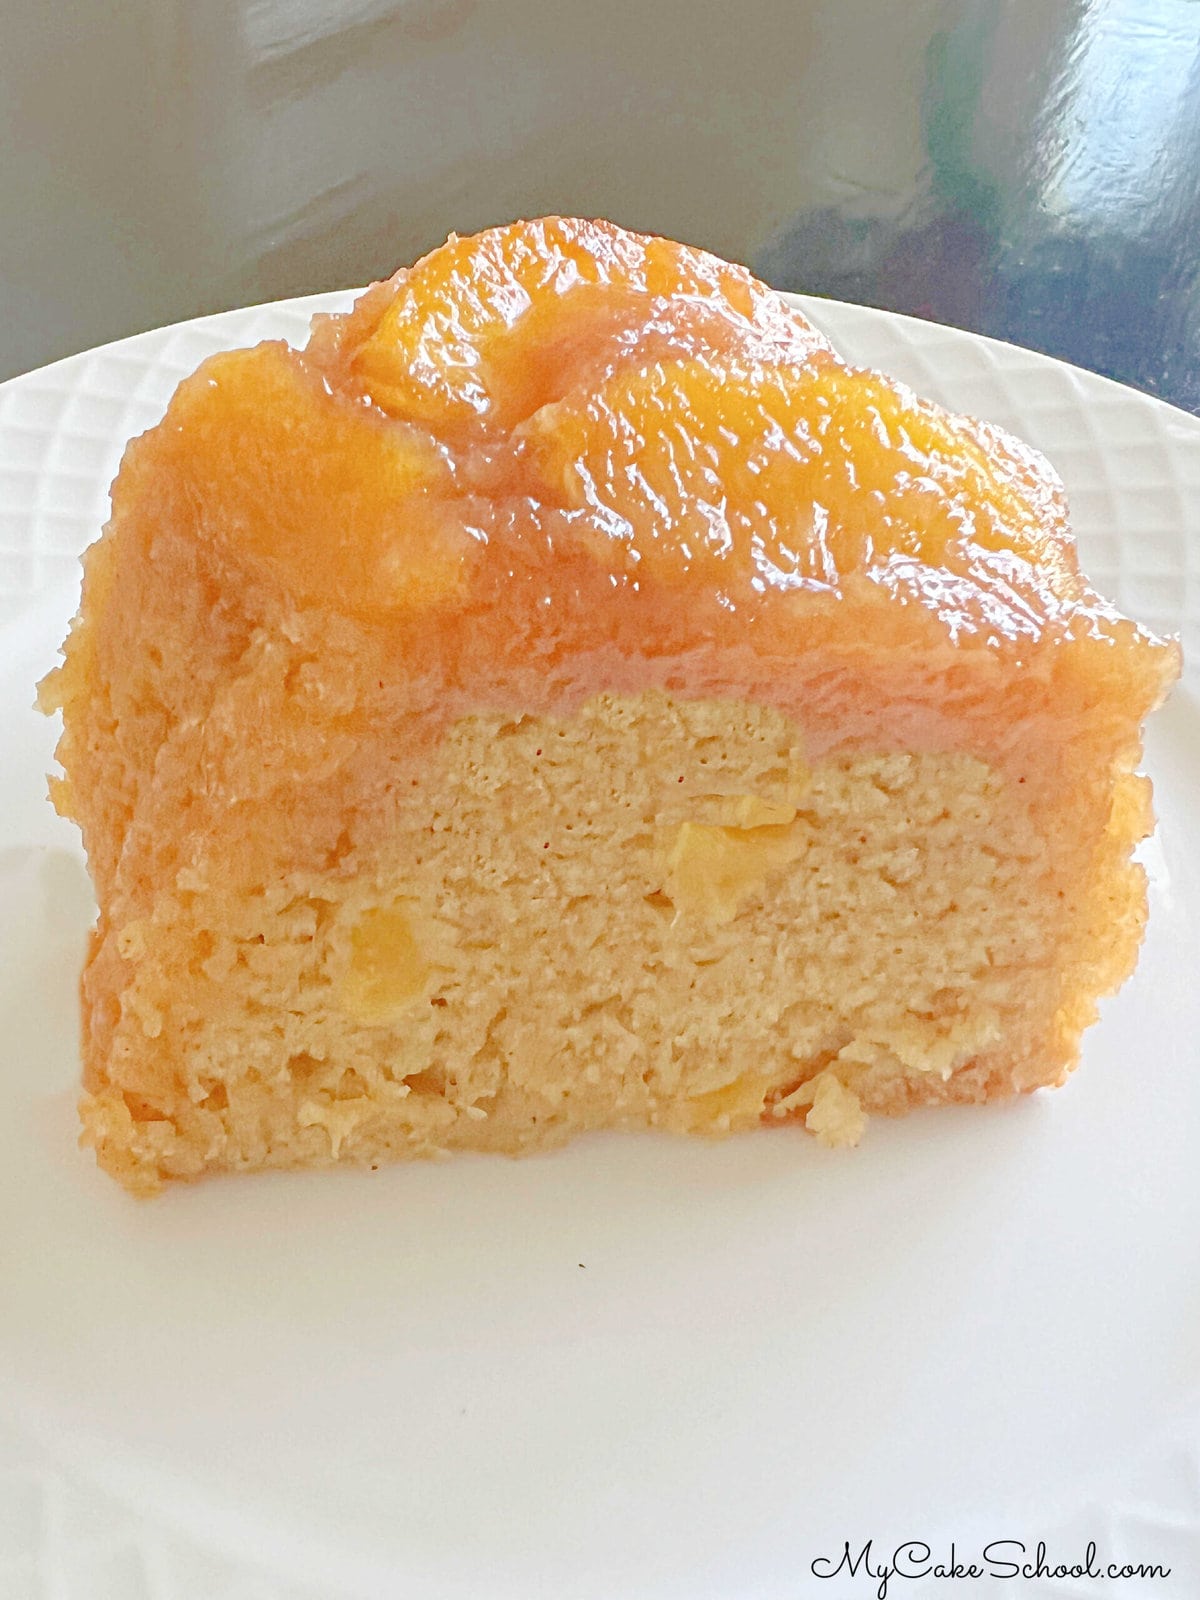 Slice of Peach Upside Down Cake on a plate.